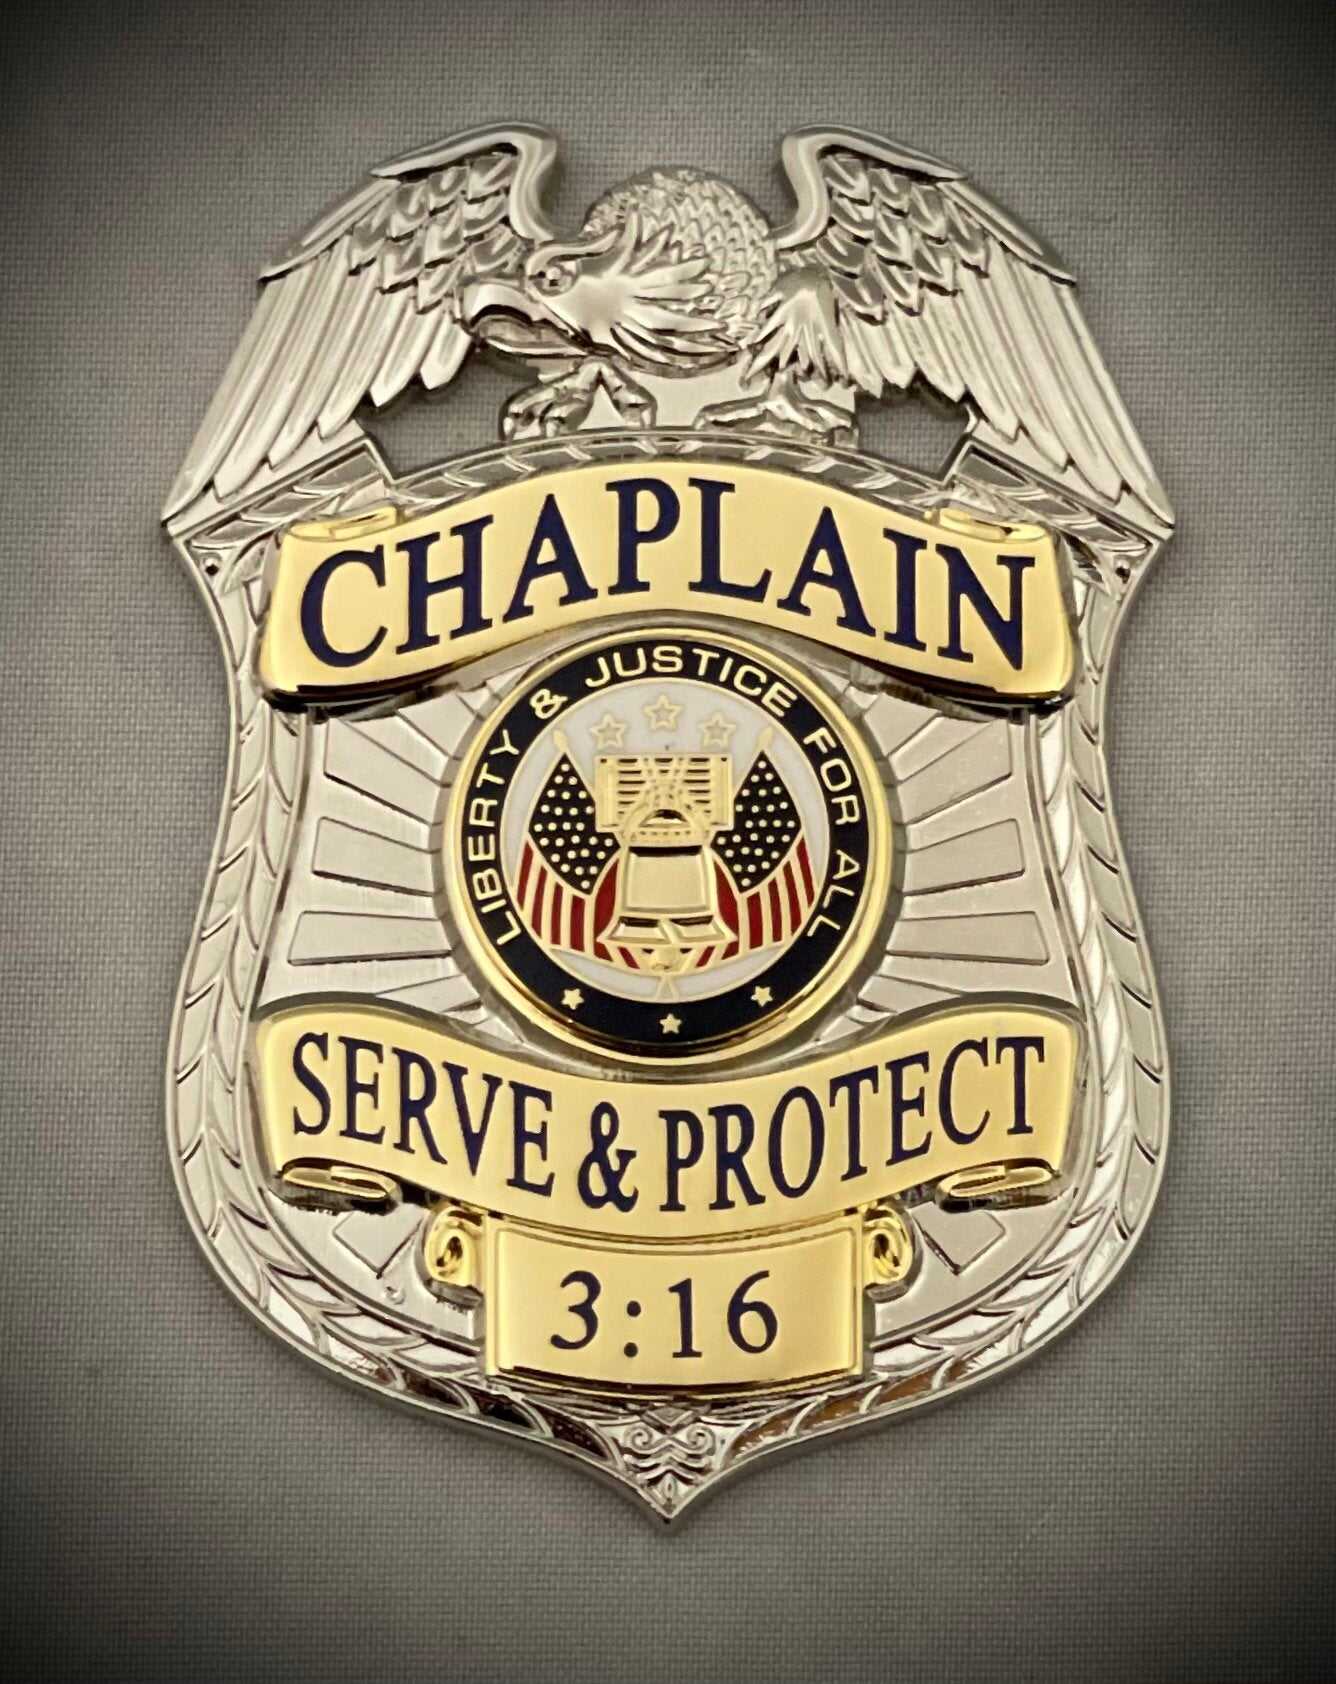 Chaplain Serve and Protect Silver Two-Tone Badge and 2 Nameplates leather ID holder